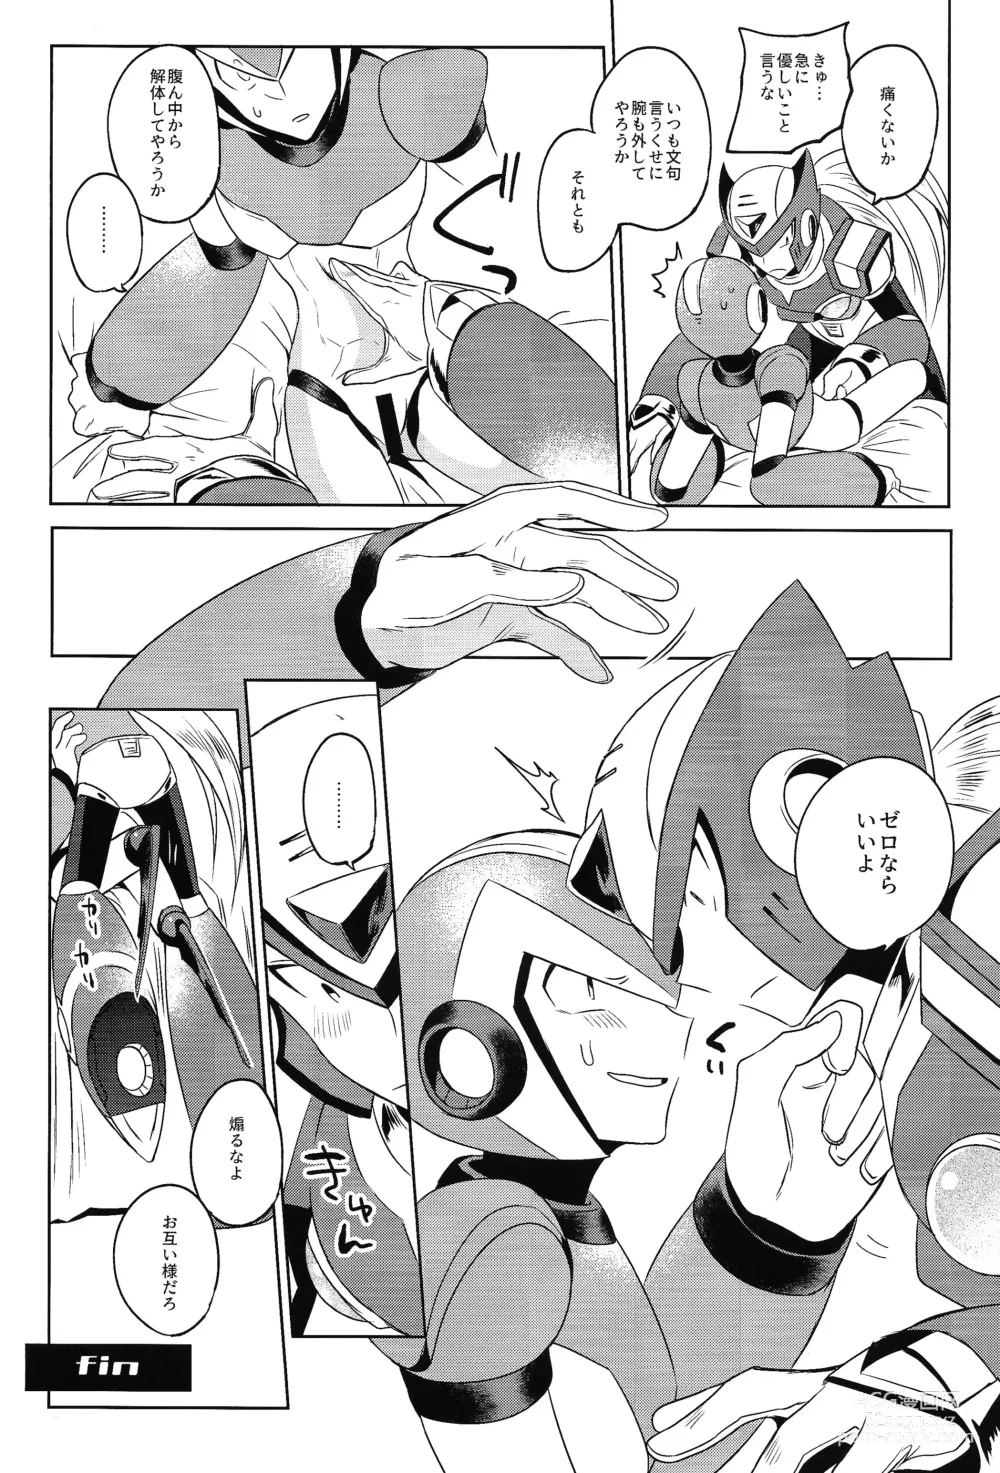 Page 25 of doujinshi HYPER EMERGENCY CALL